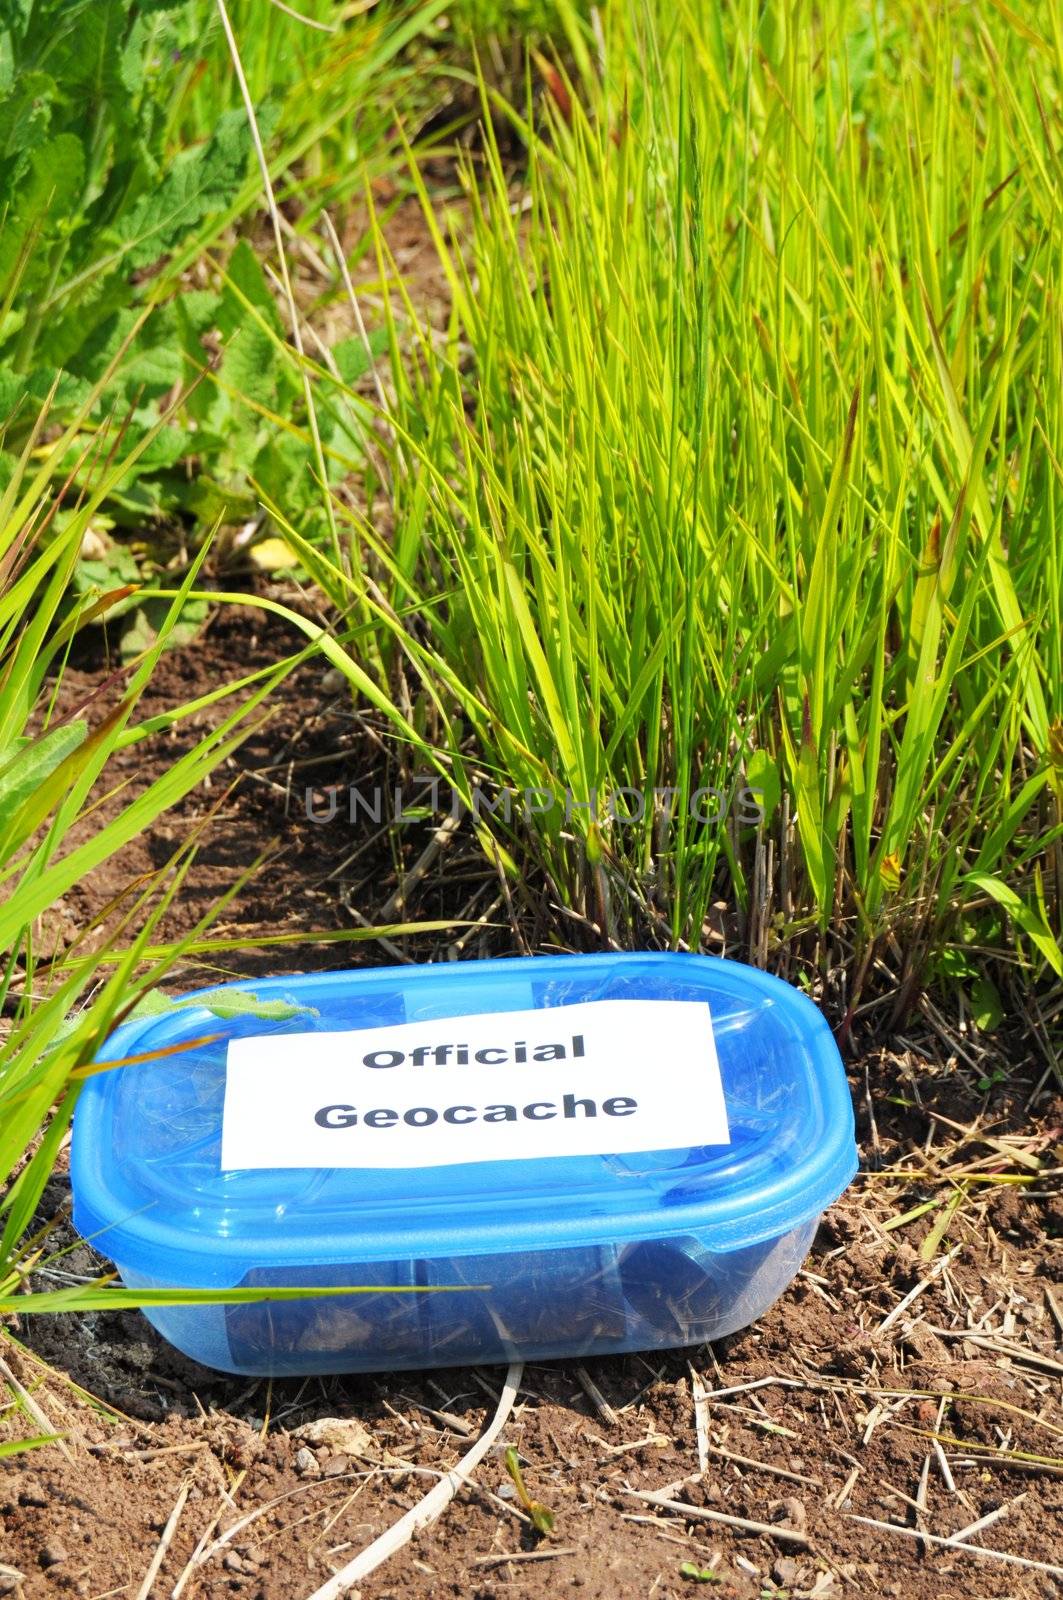 geocaching concept with blue geocache box showing outdoor sports concept